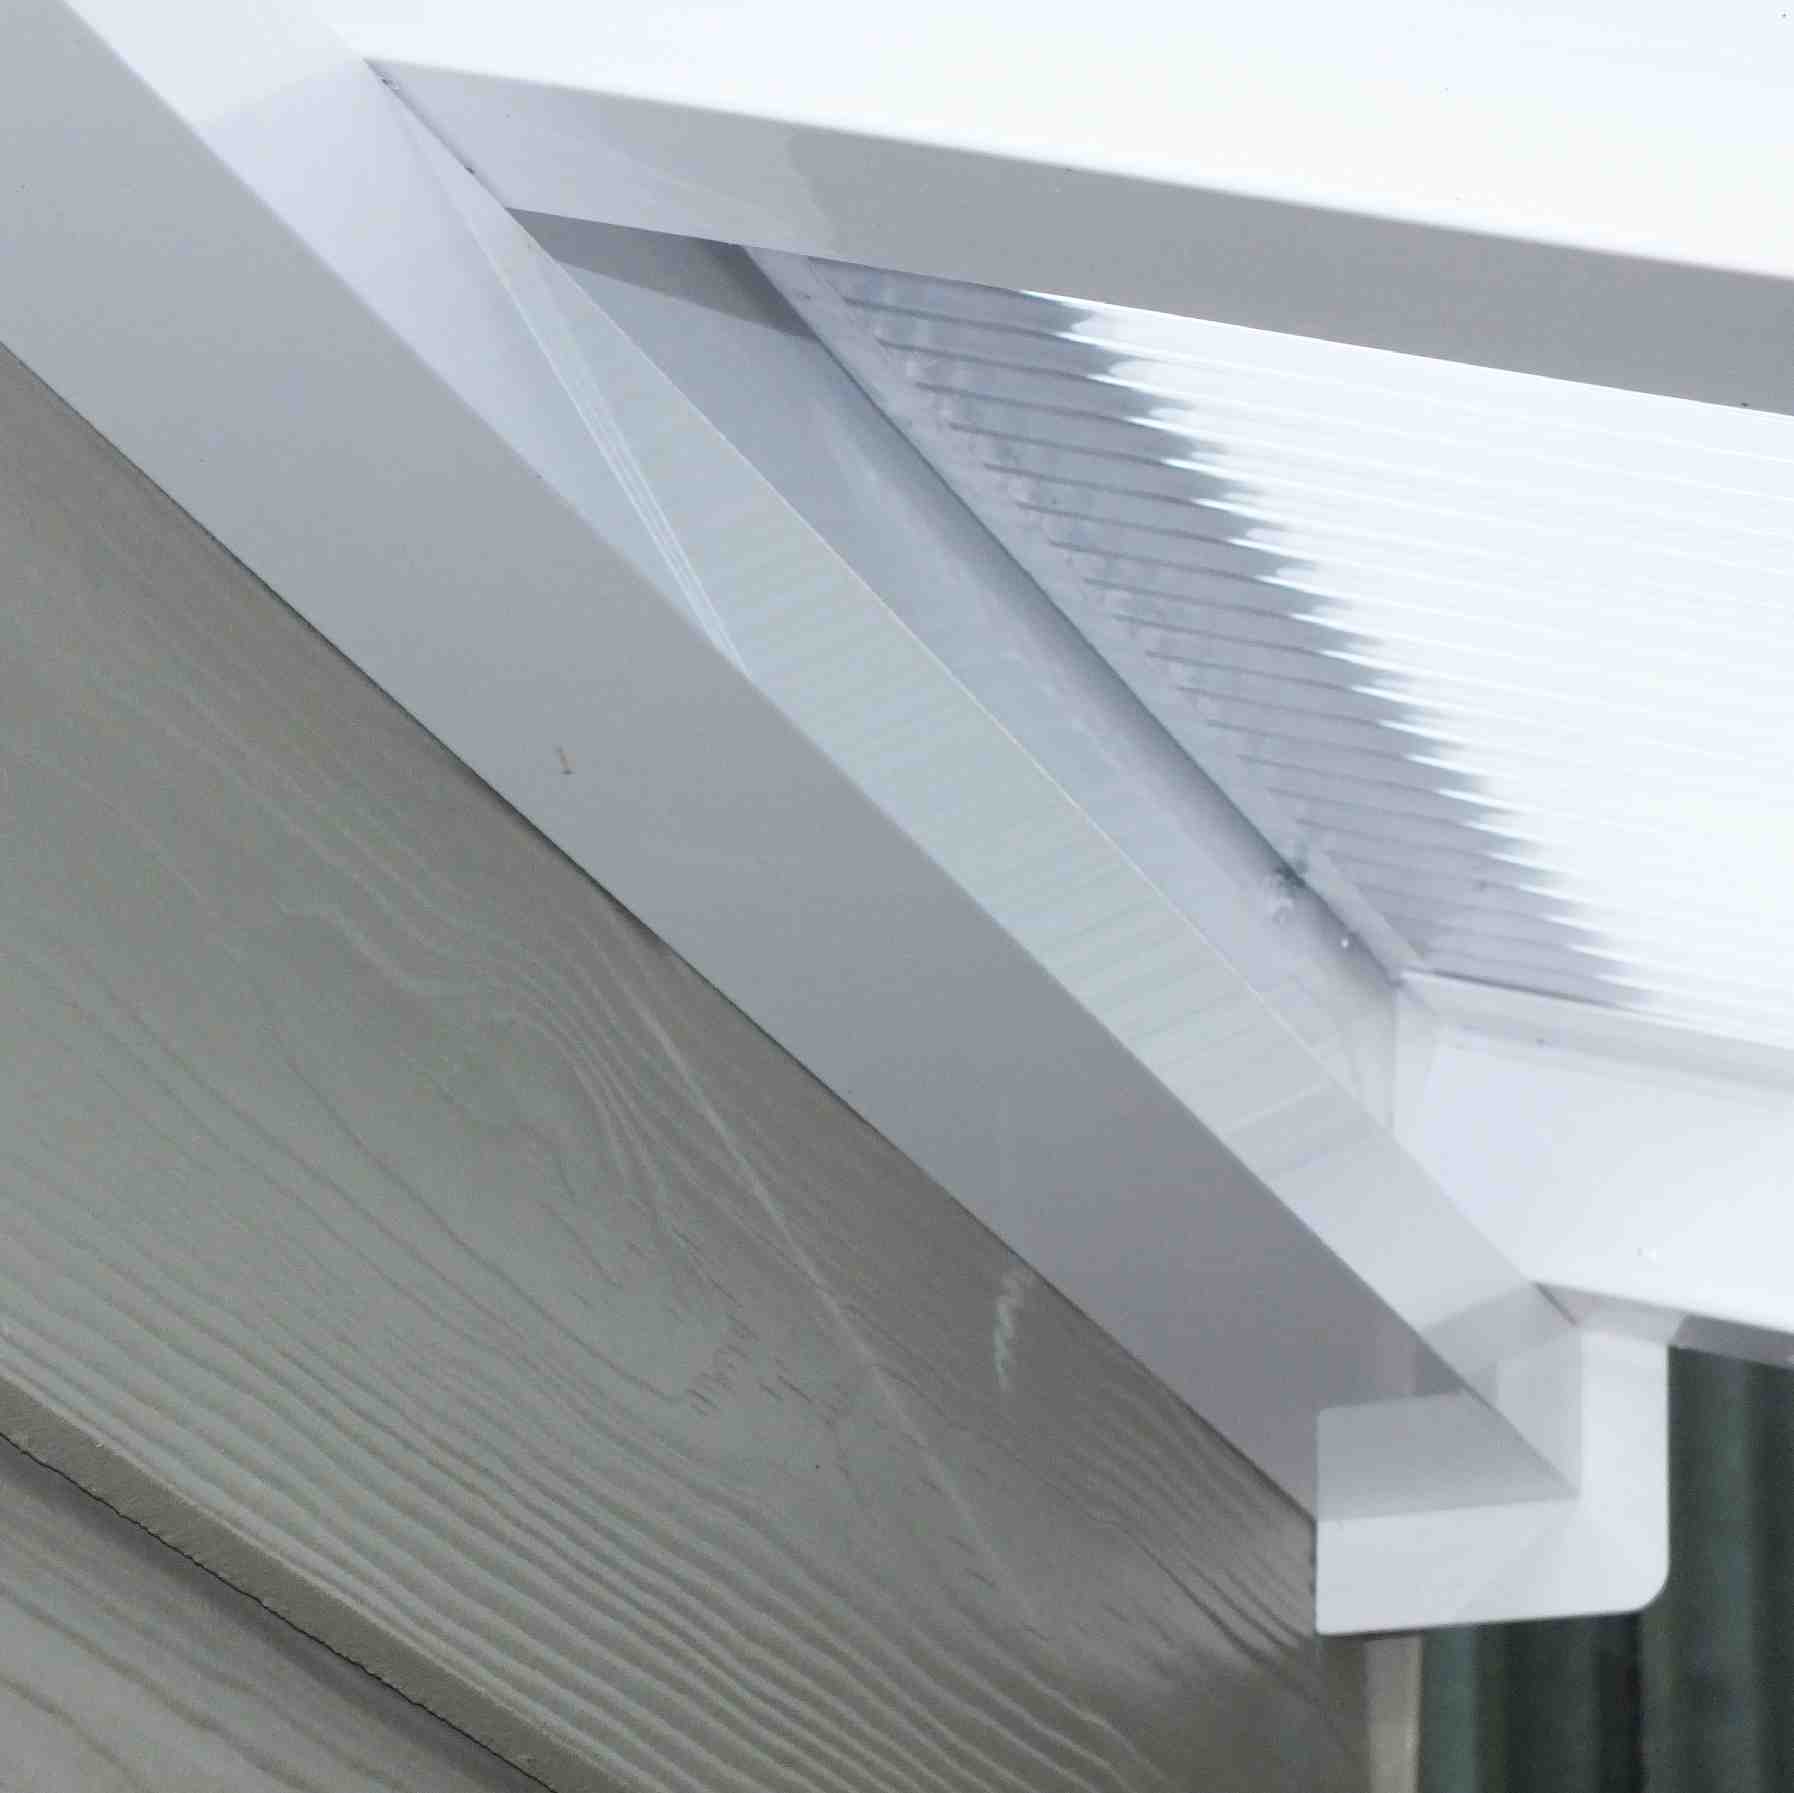 Great deals on Omega Verandah White with 16mm Polycarbonate Glazing - 8.4m (W) x 2.5m (P), (4) Supporting Posts